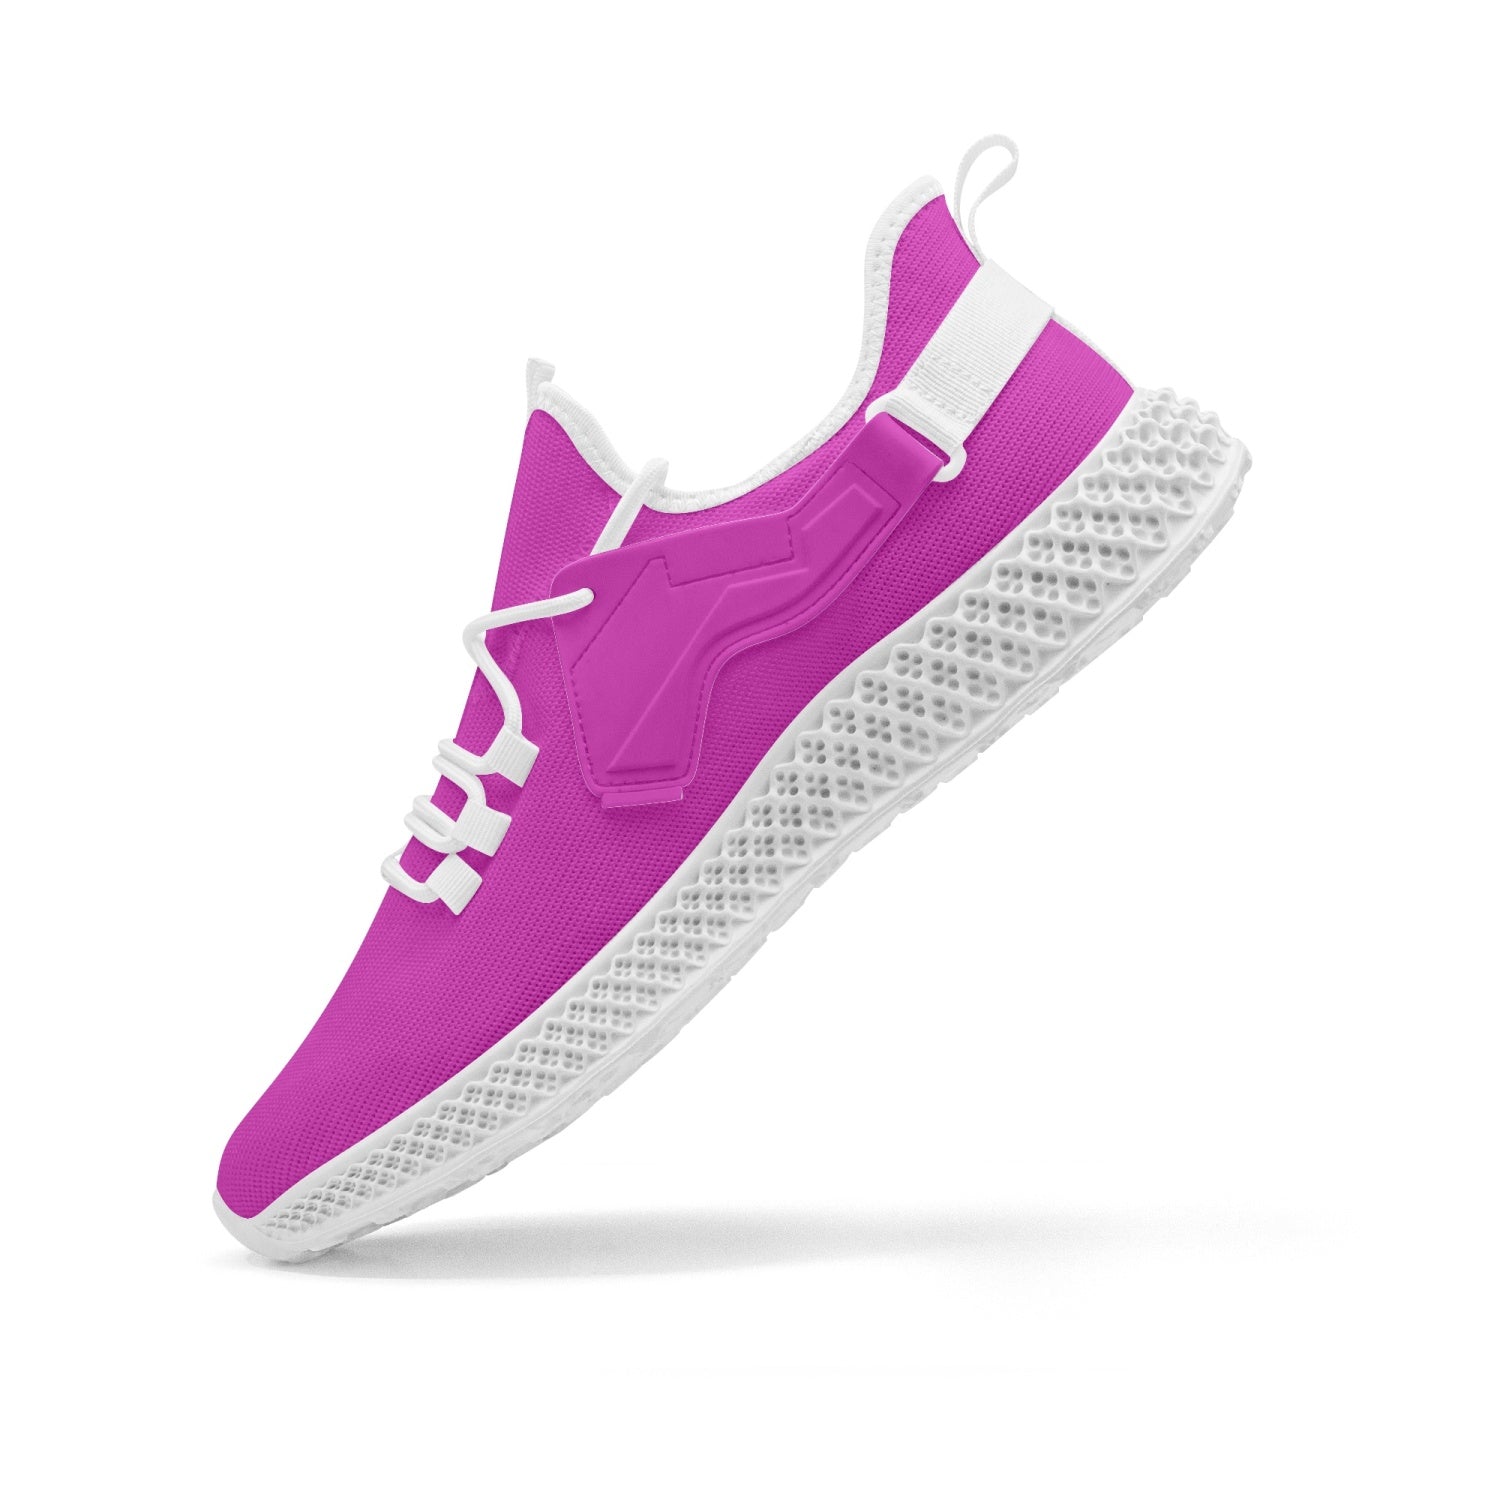 Unisex Mexican Pink Net Style Mesh Knit Sneakers